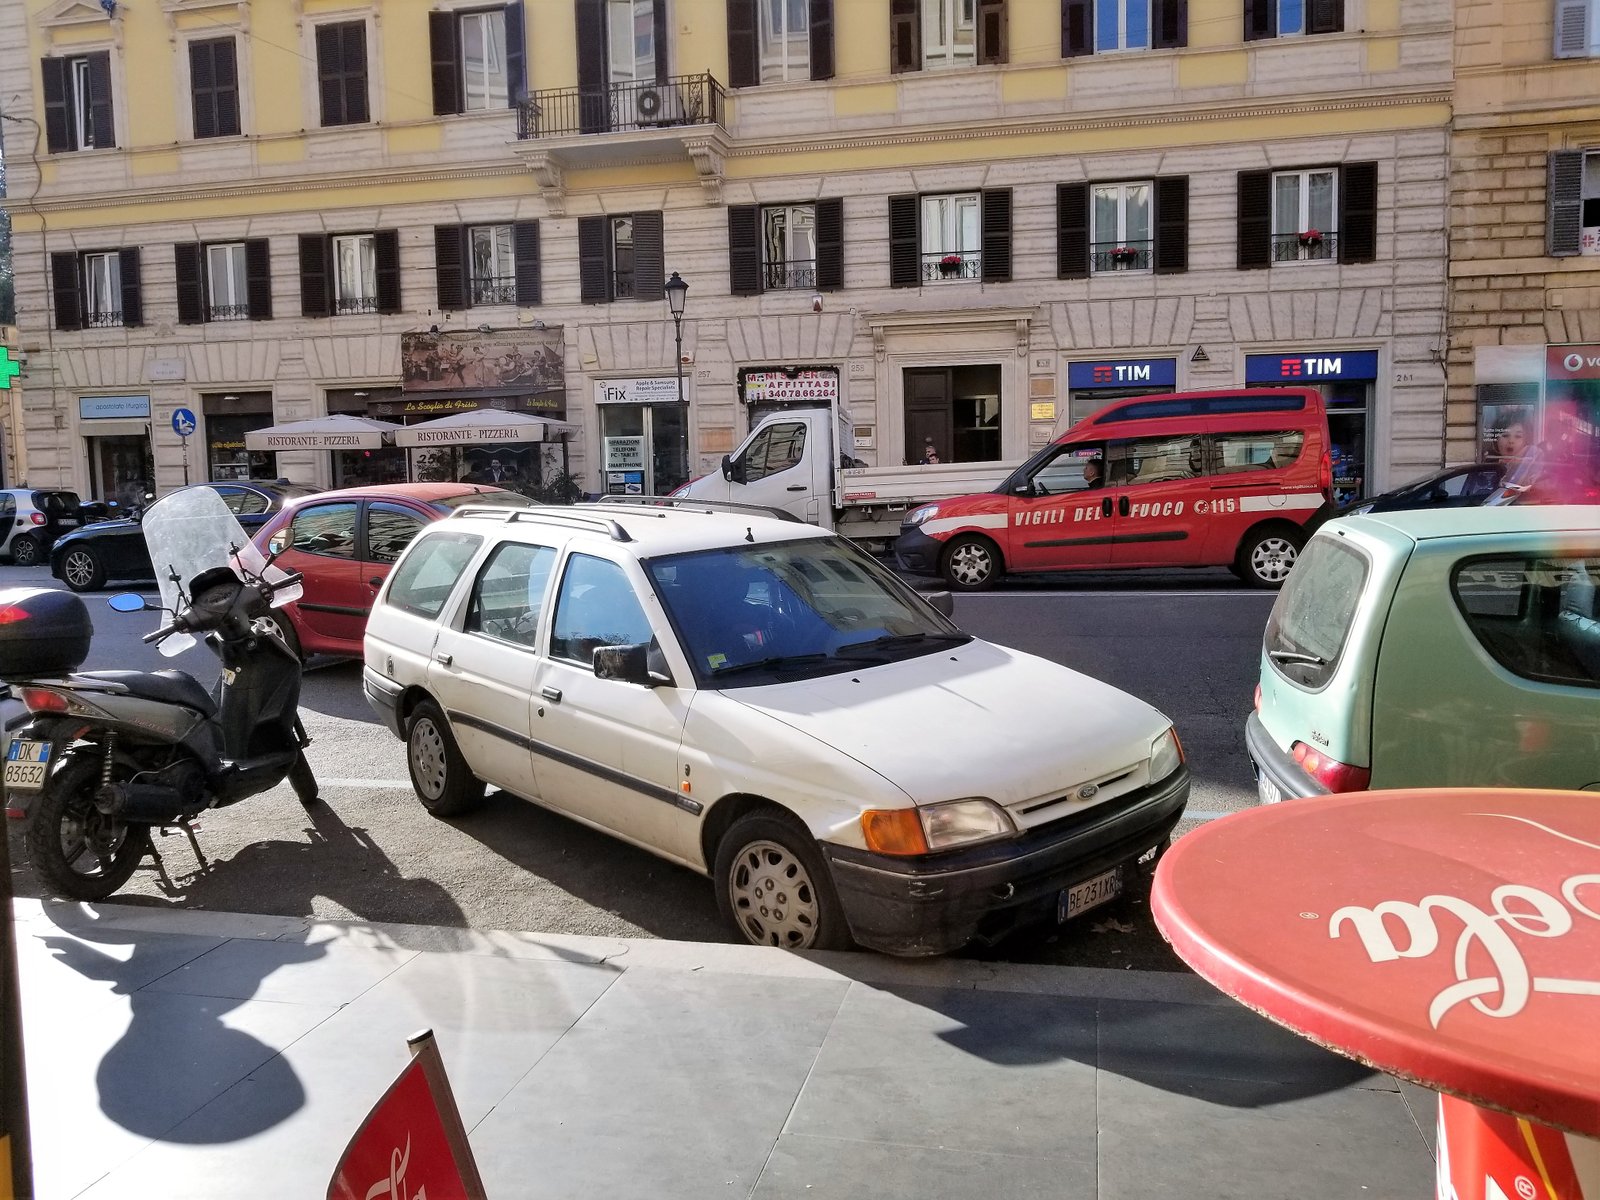 Parking in Rome, Italy, ouritalianjourney.com